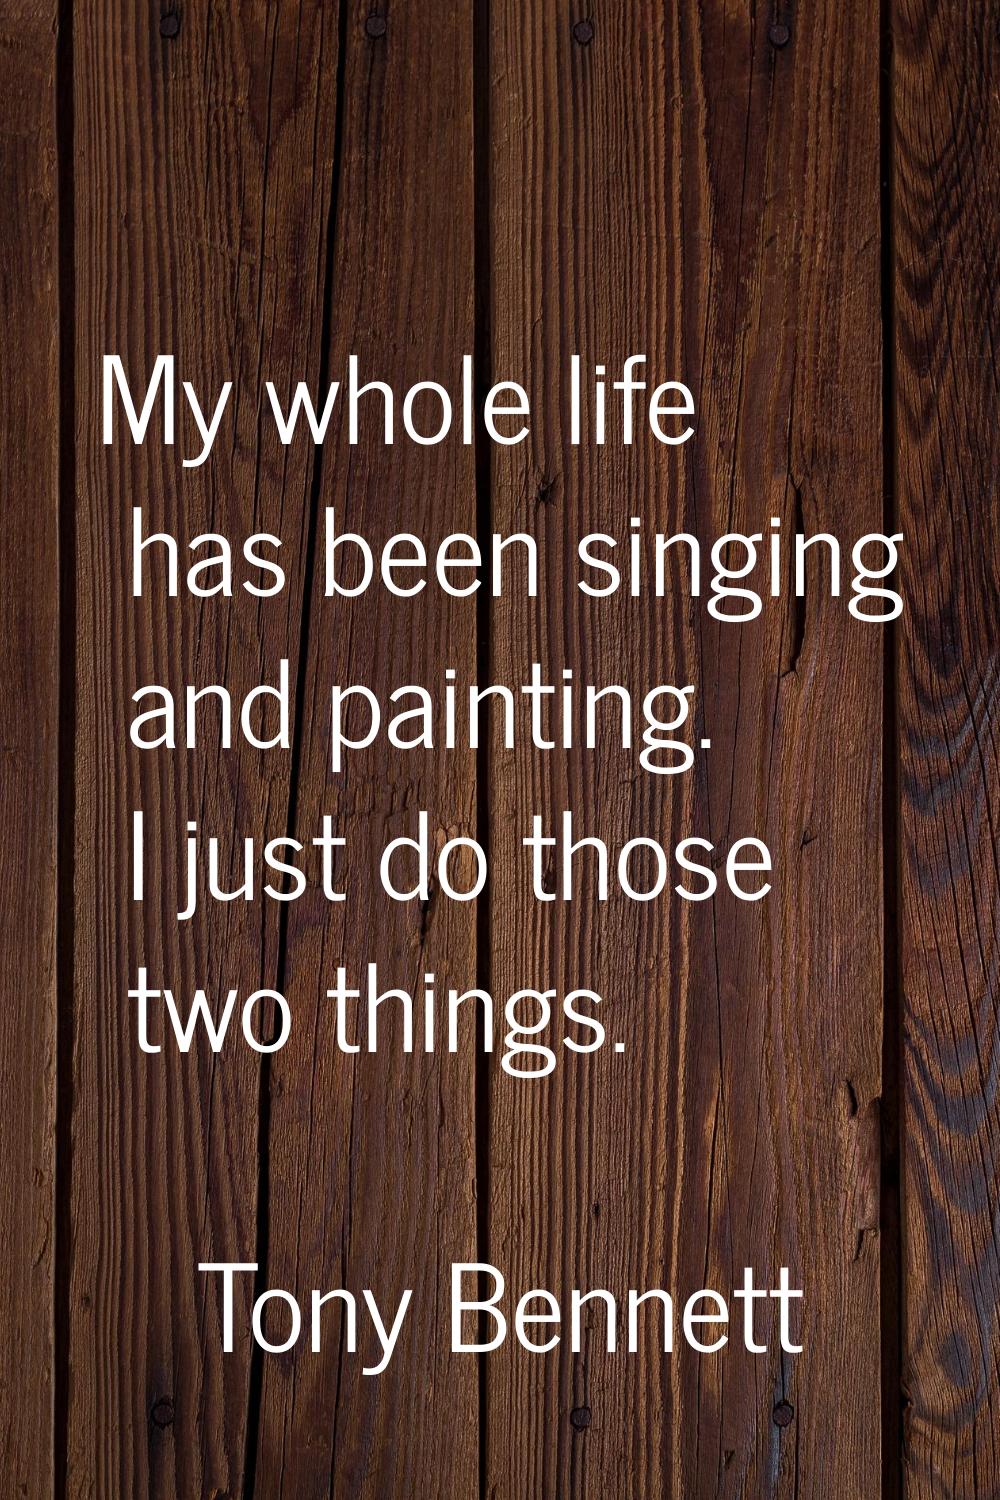 My whole life has been singing and painting. I just do those two things.